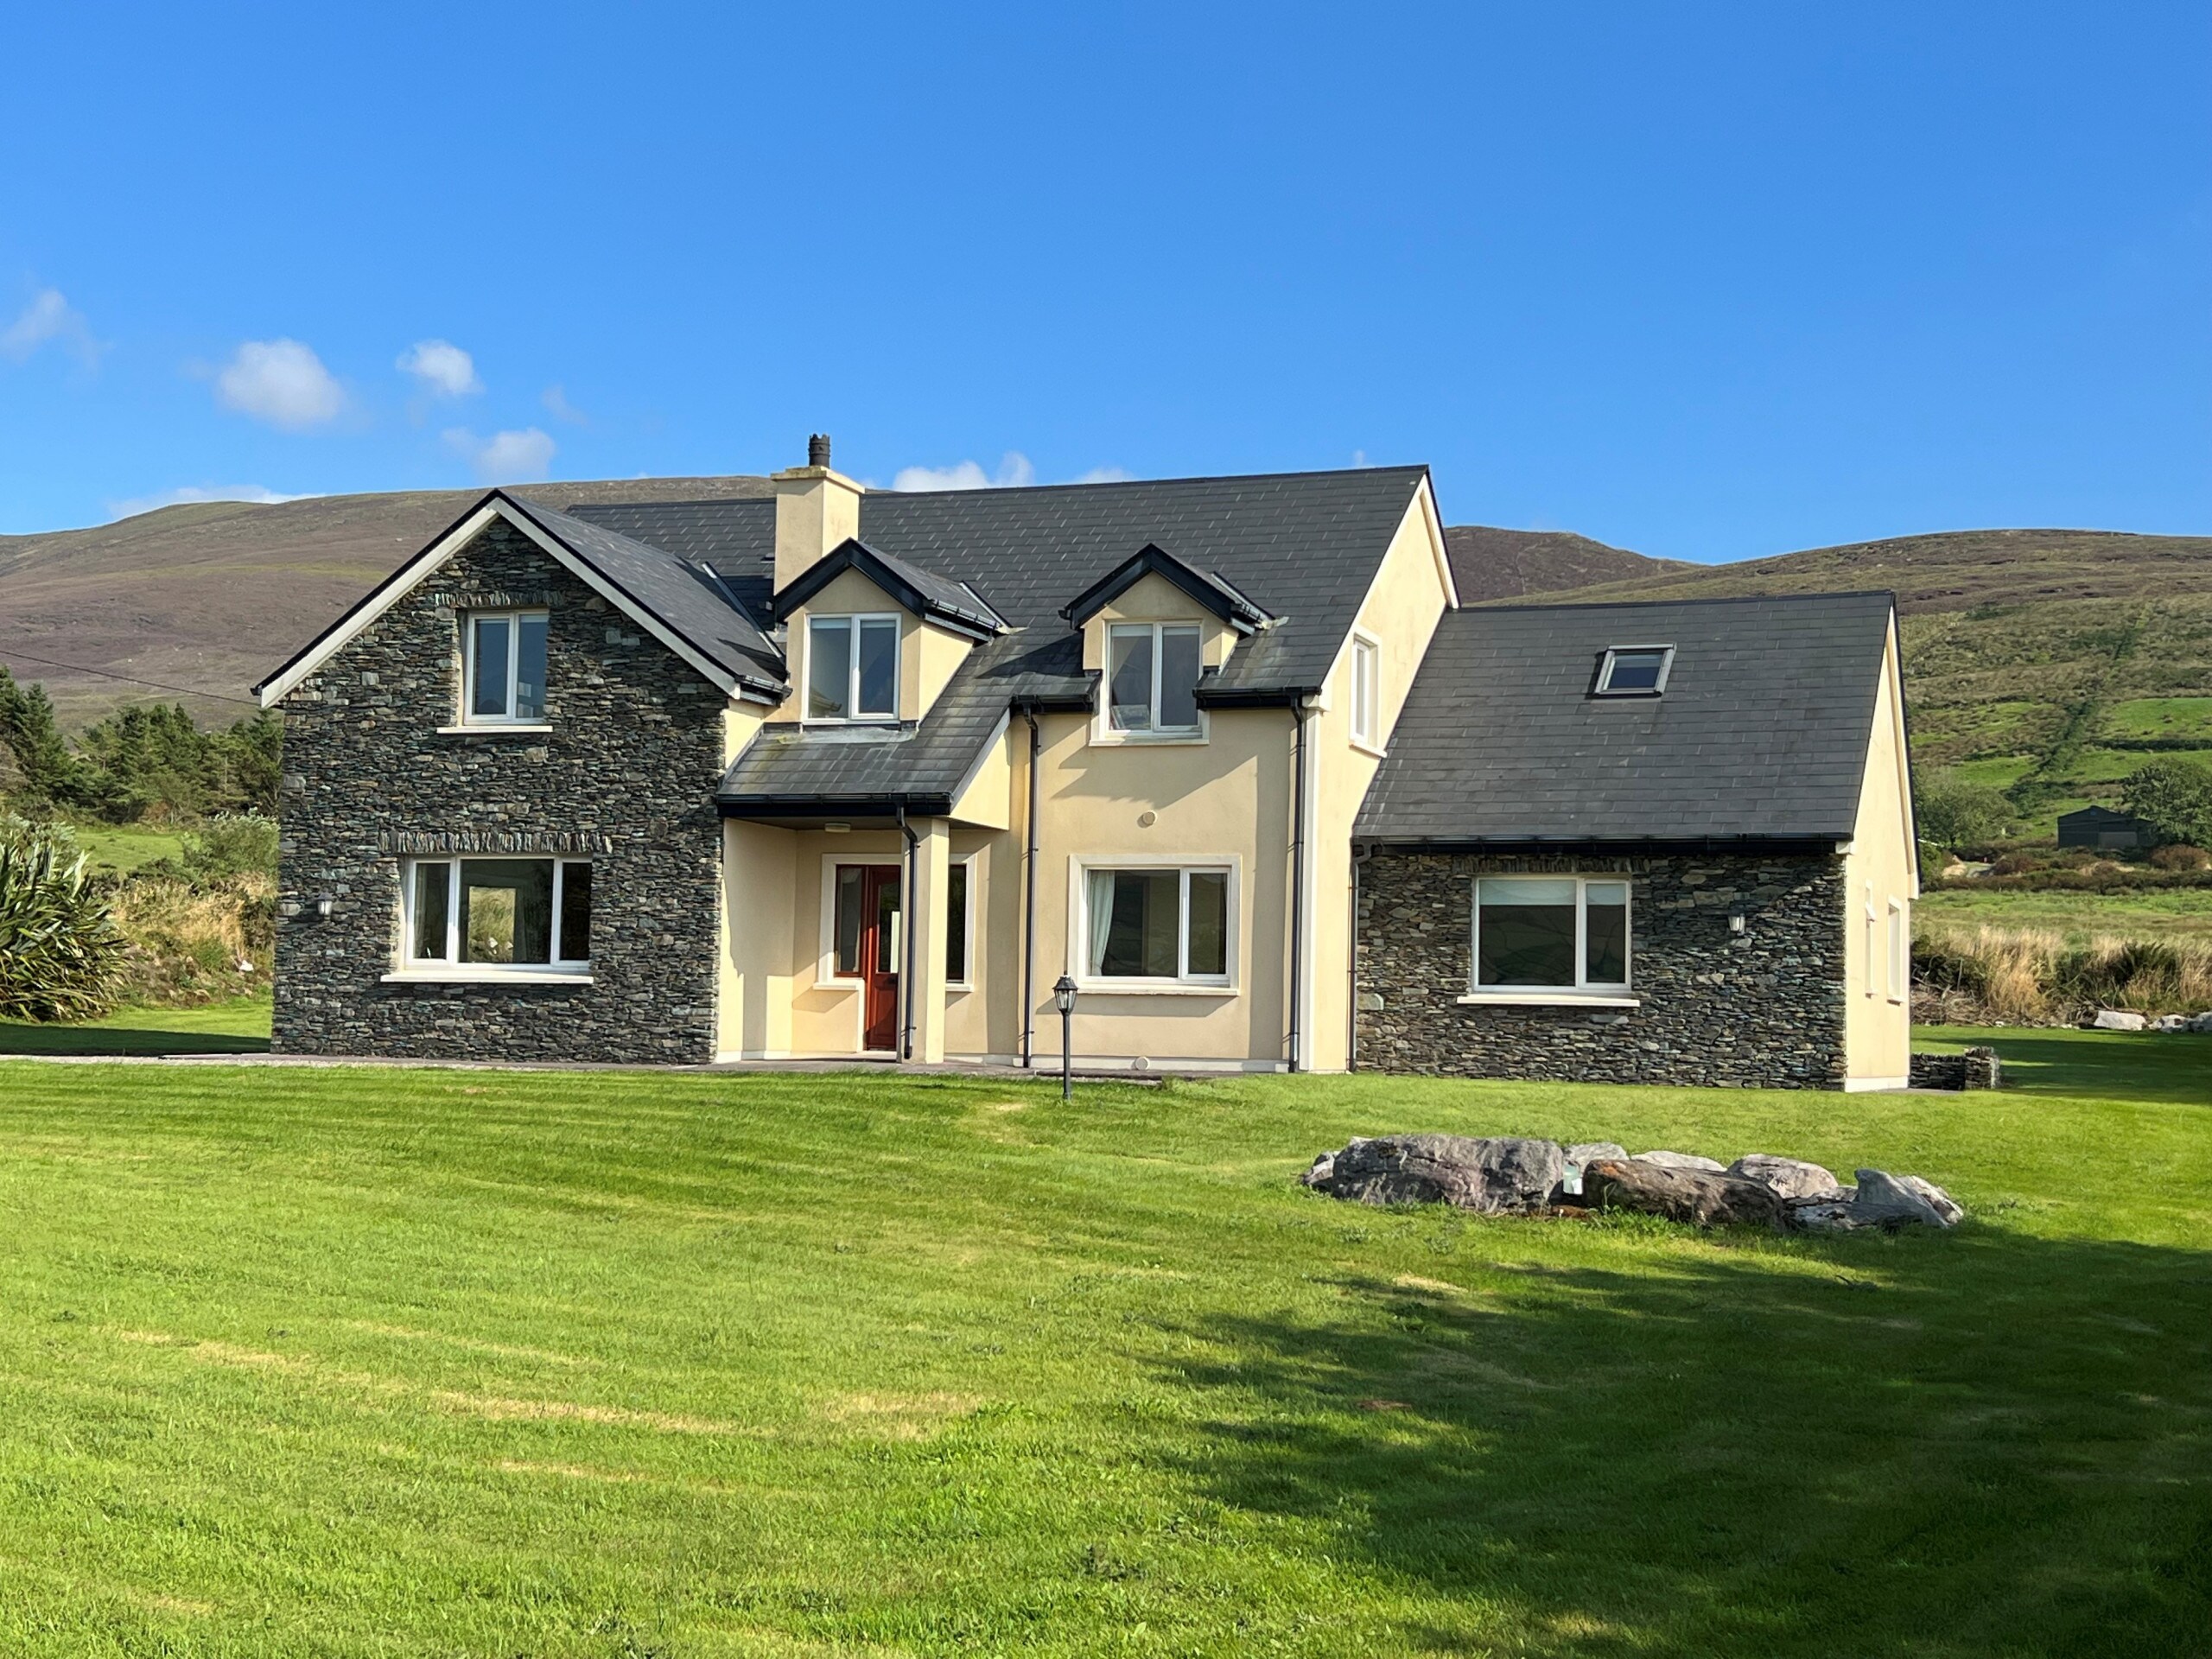 Valentia View Holiday Home, Coastal Holiday Accommodation Available near Caherciveen, County Kerry| Trident Holiday Homes | Read More and Book Online Today